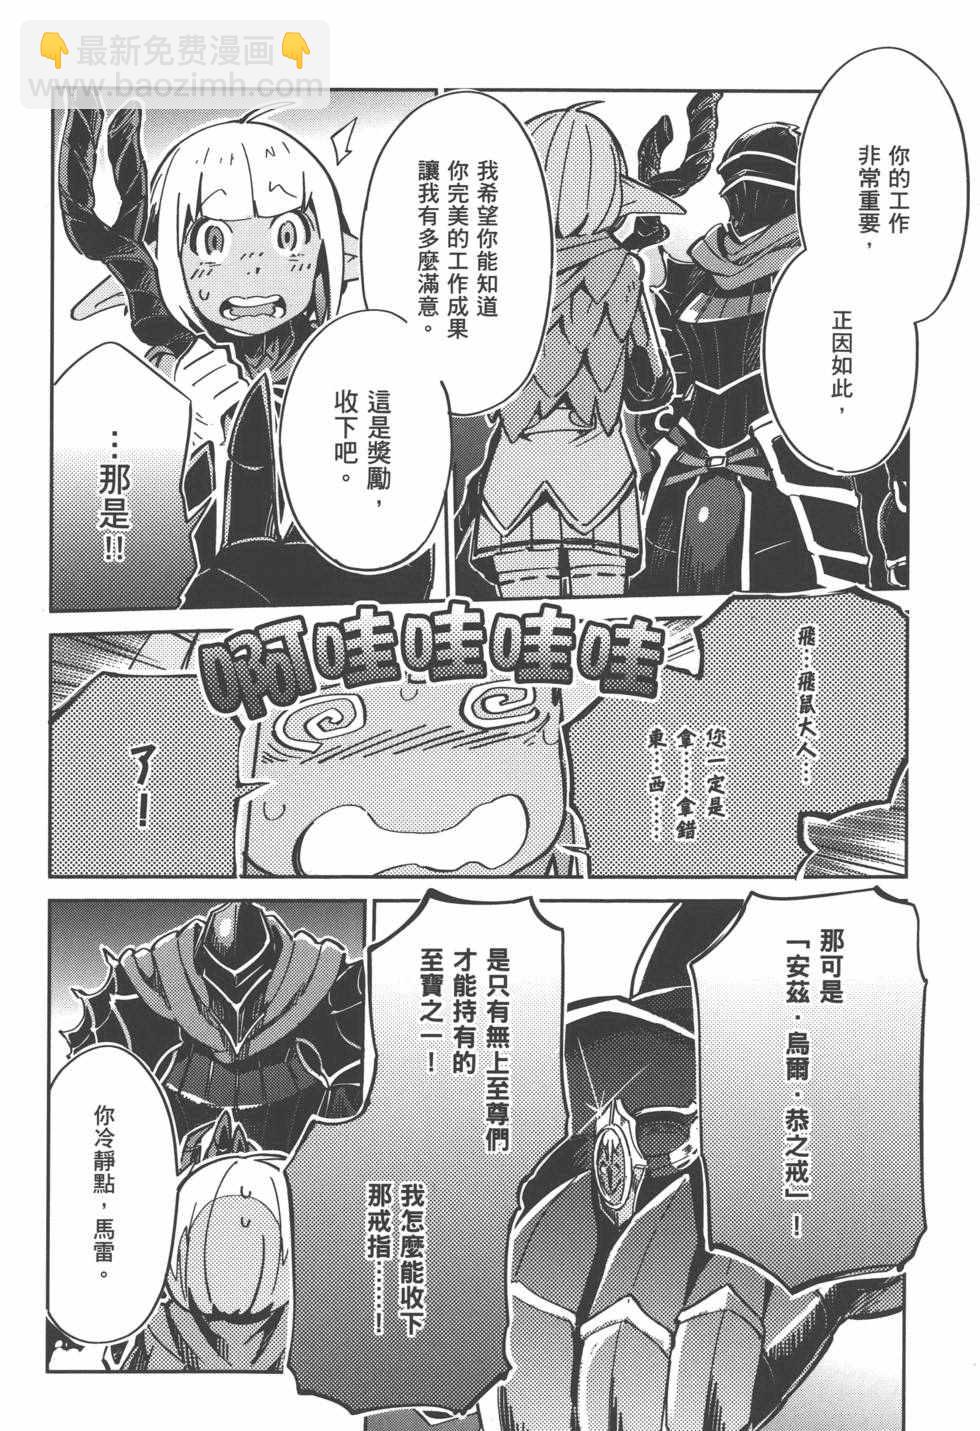 OVERLORD - 第1卷(2/4) - 8